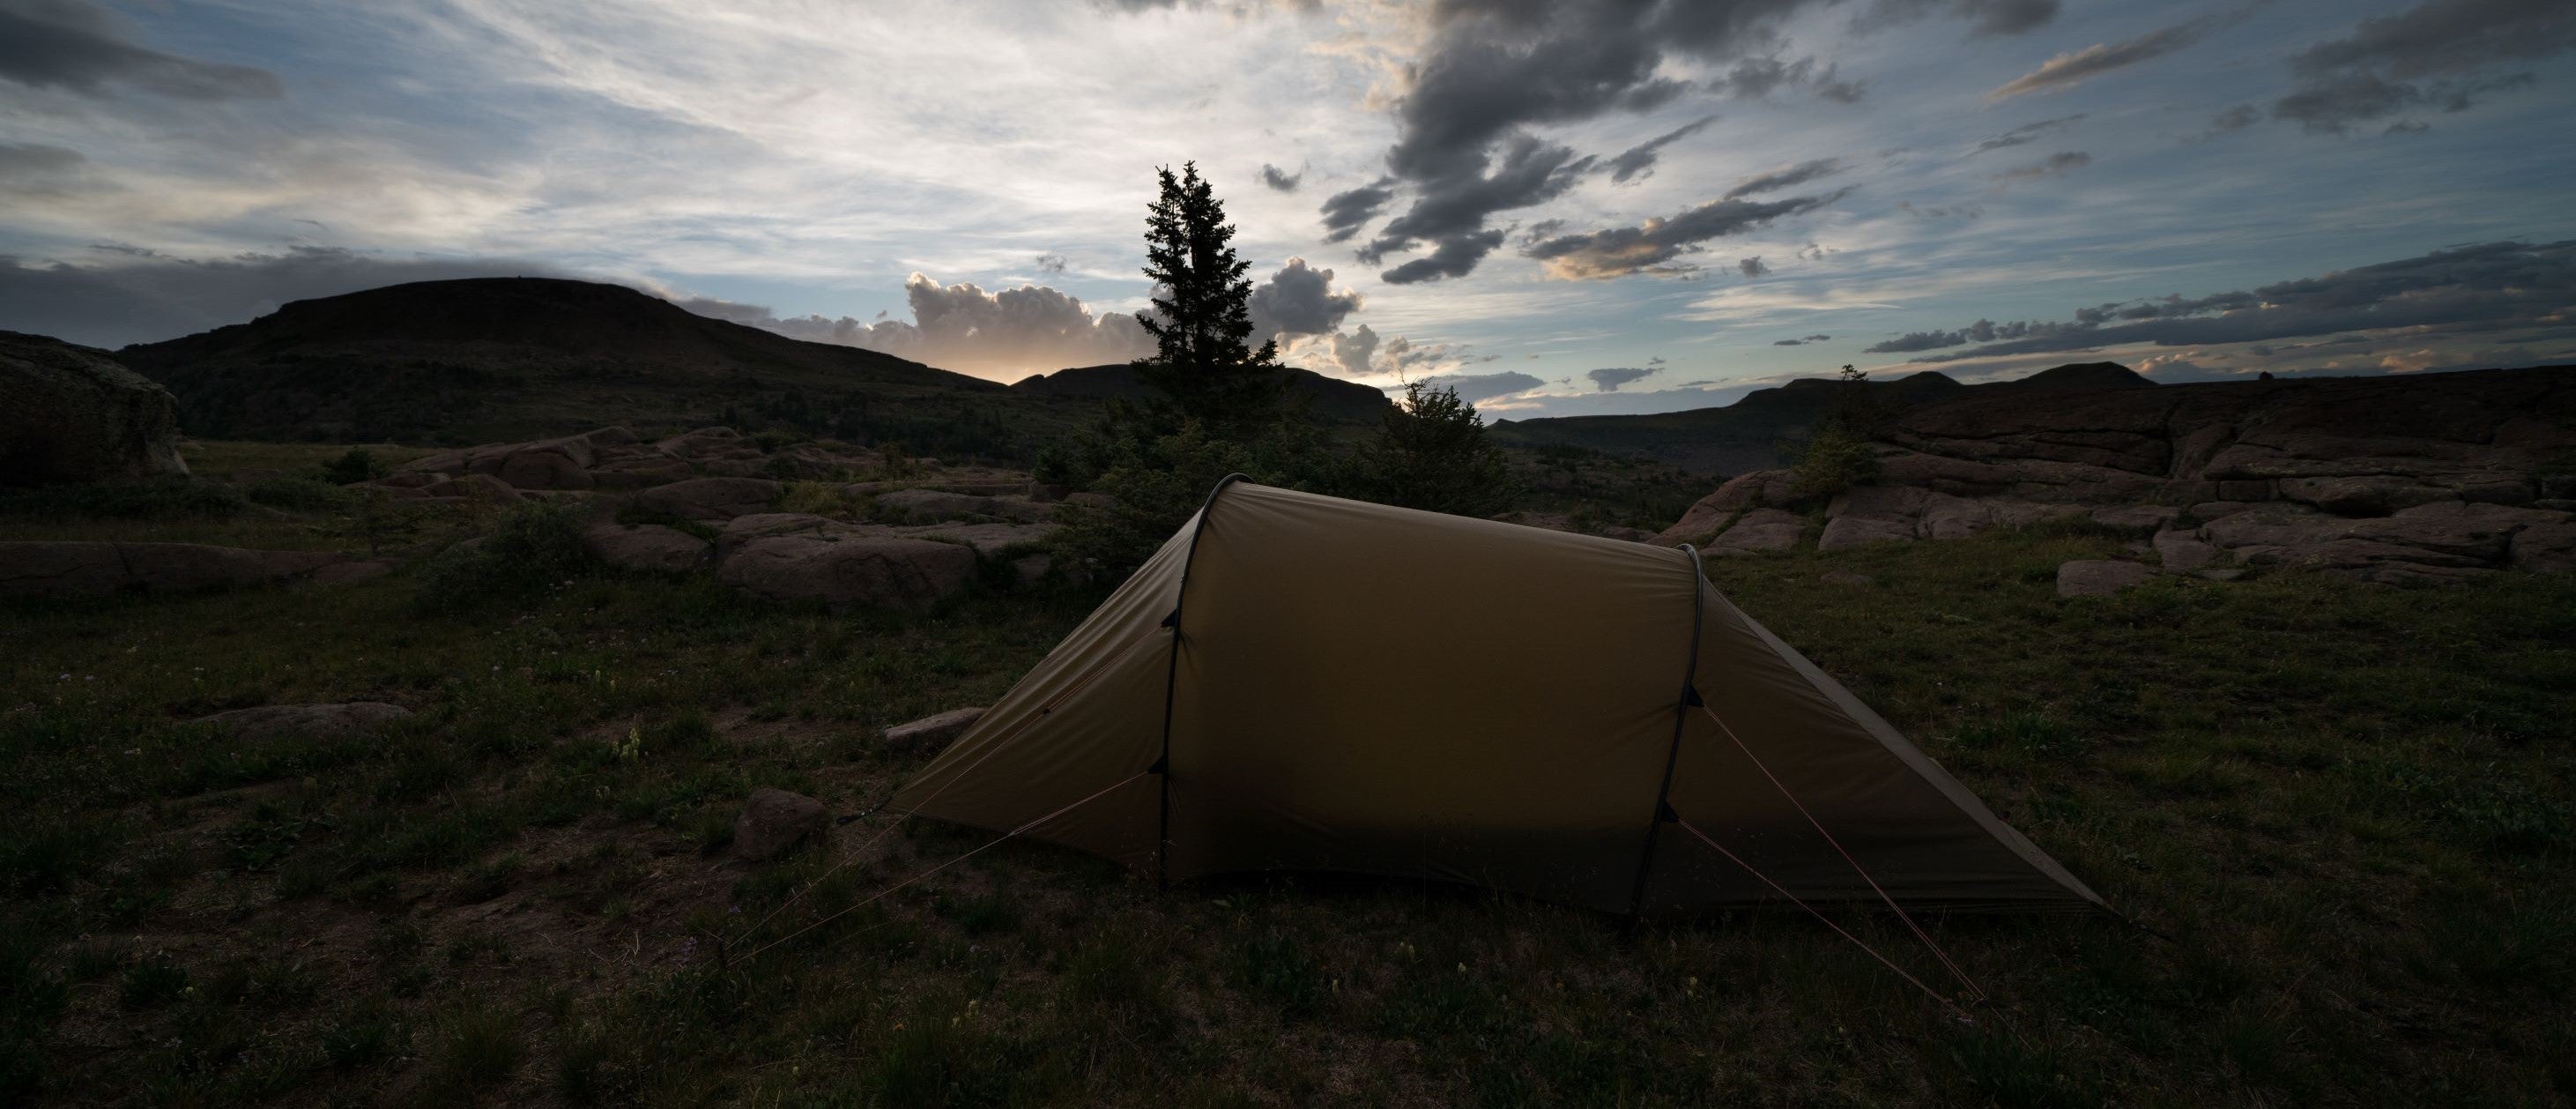 A full view of a tent with a full view of sunrise